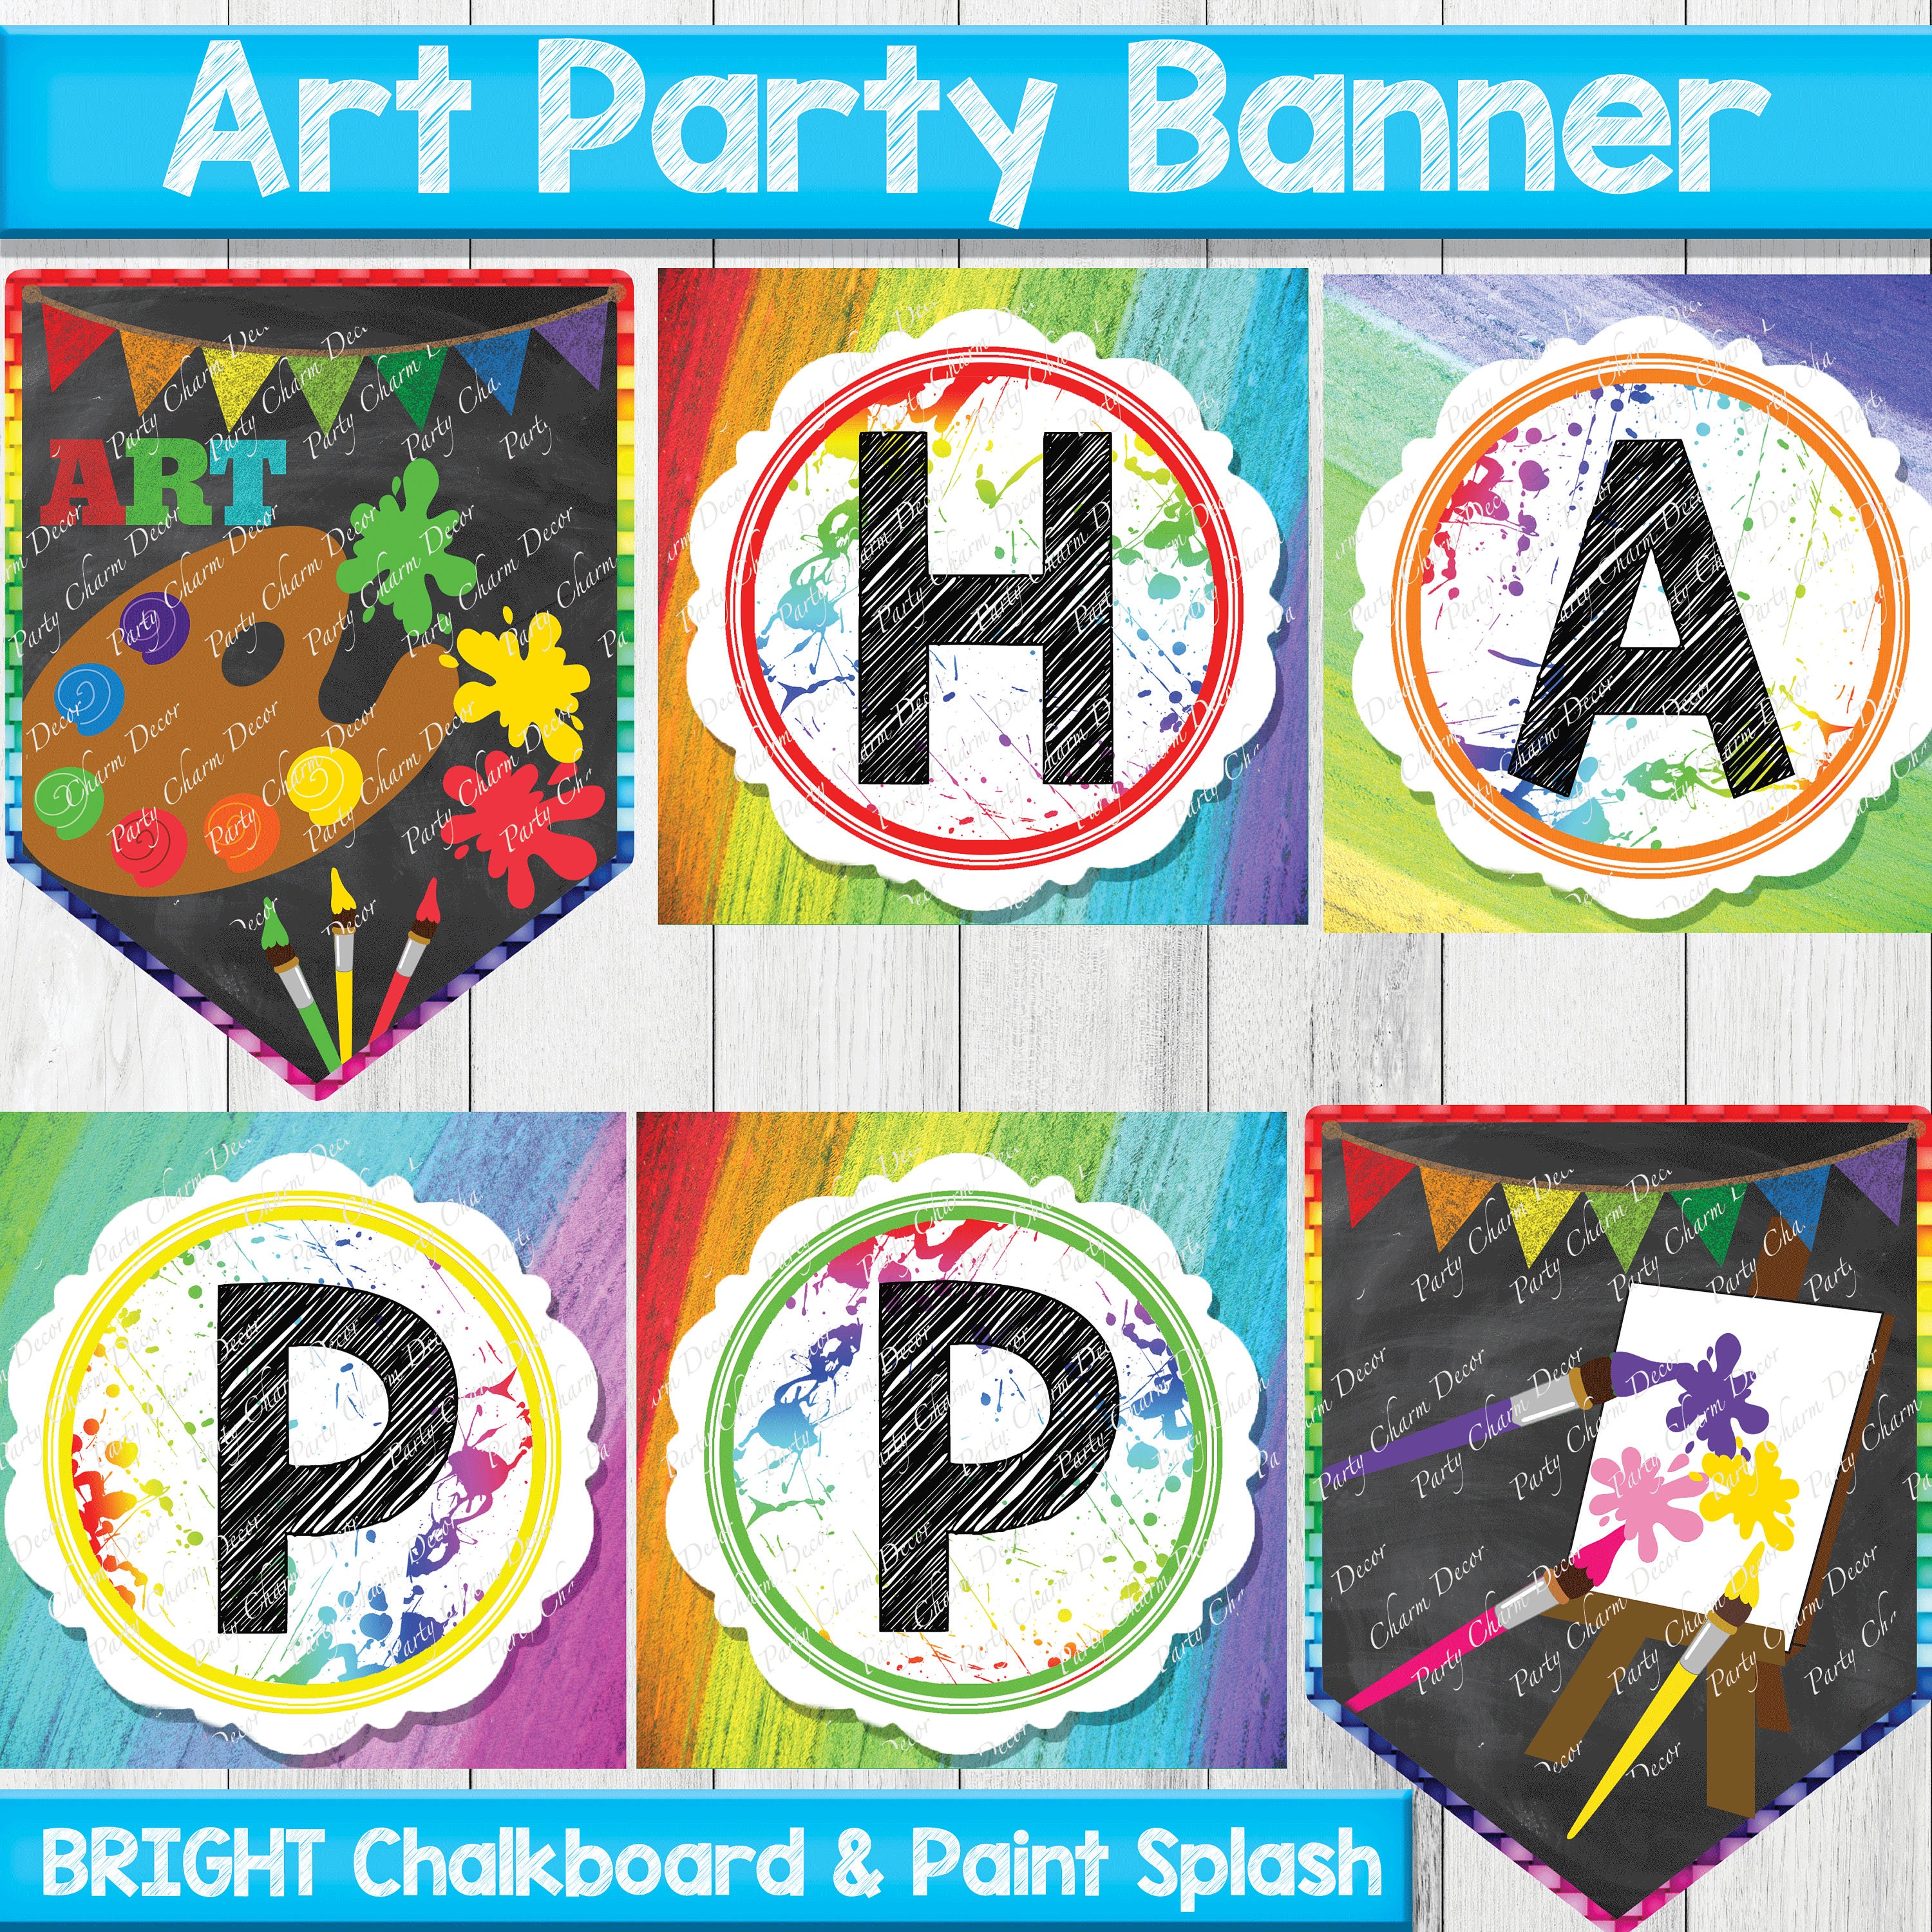 Art Party, Art Party Signs, Art Party Favors, Art Party Decorations,  Painting Party Signs, Paint Party, Painting Party, Paint Party Signs